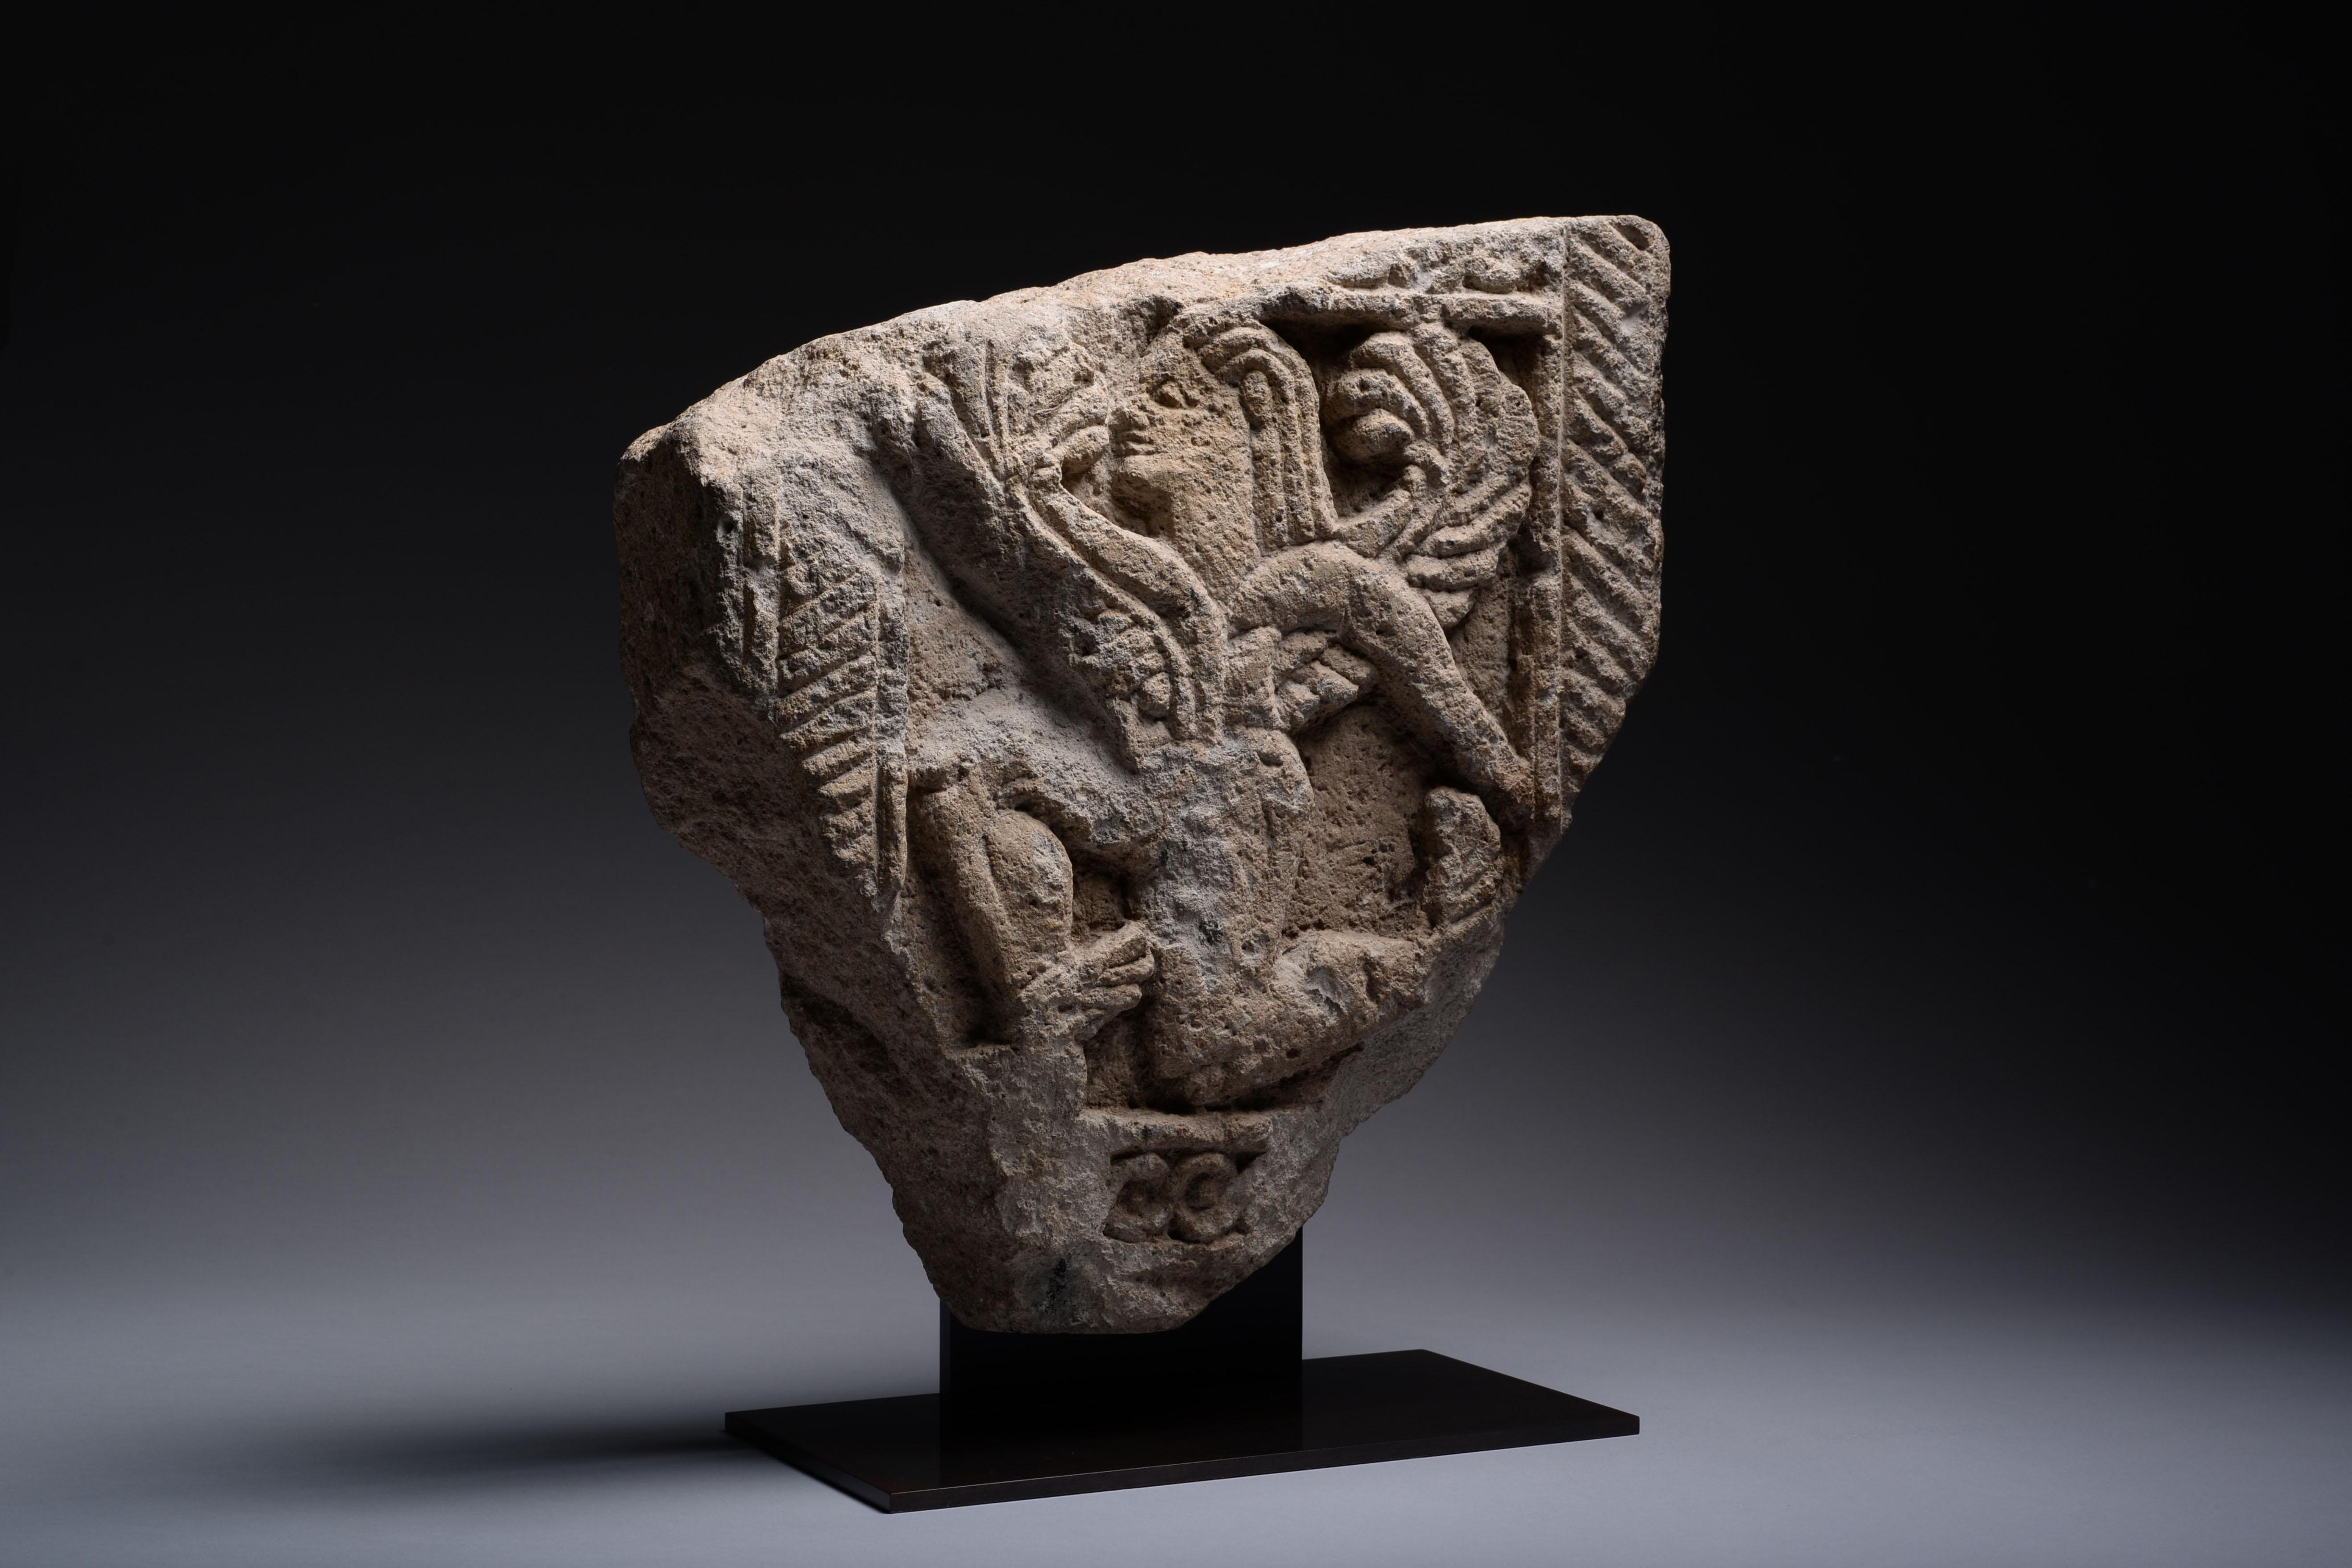 Unknown Figurative Sculpture - Ancient Etruscan Stone Relief of a Winged God